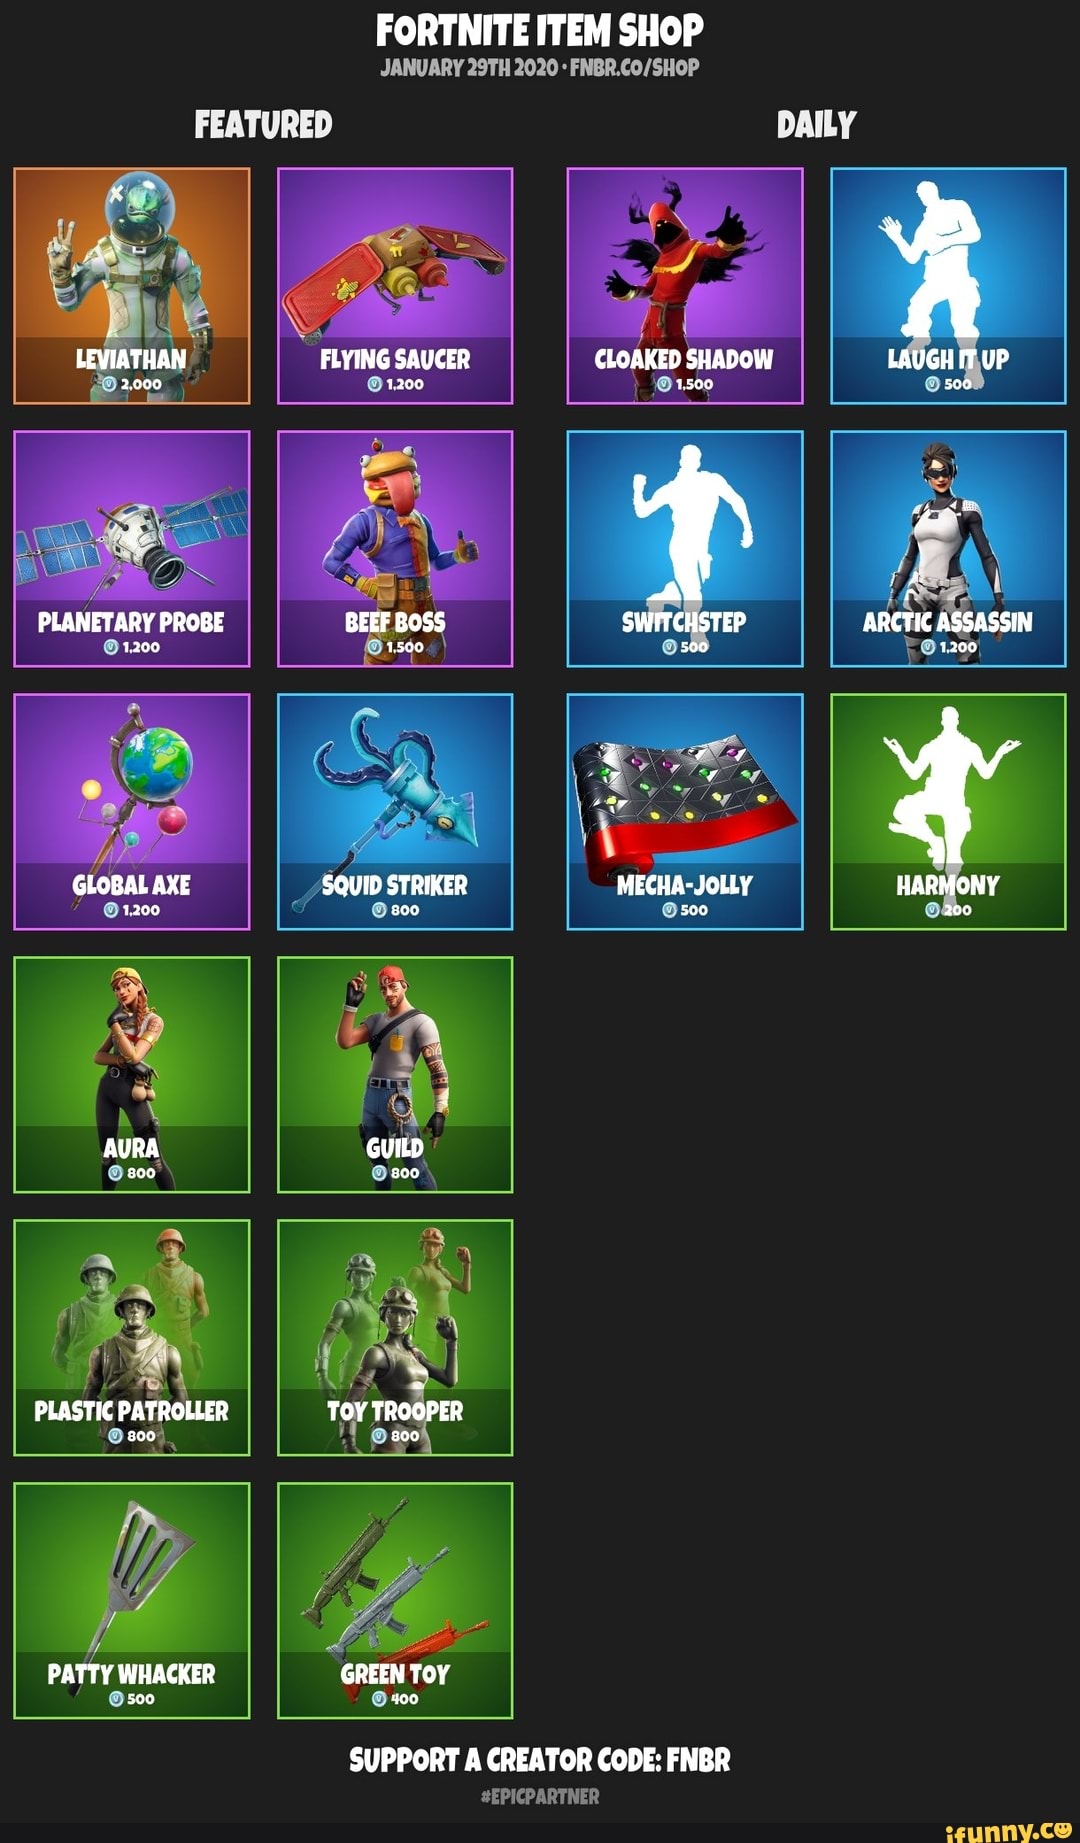 Hei! 38+  Grunner til Fnbr Shop Fortnite! The content rotates on a daily basis.